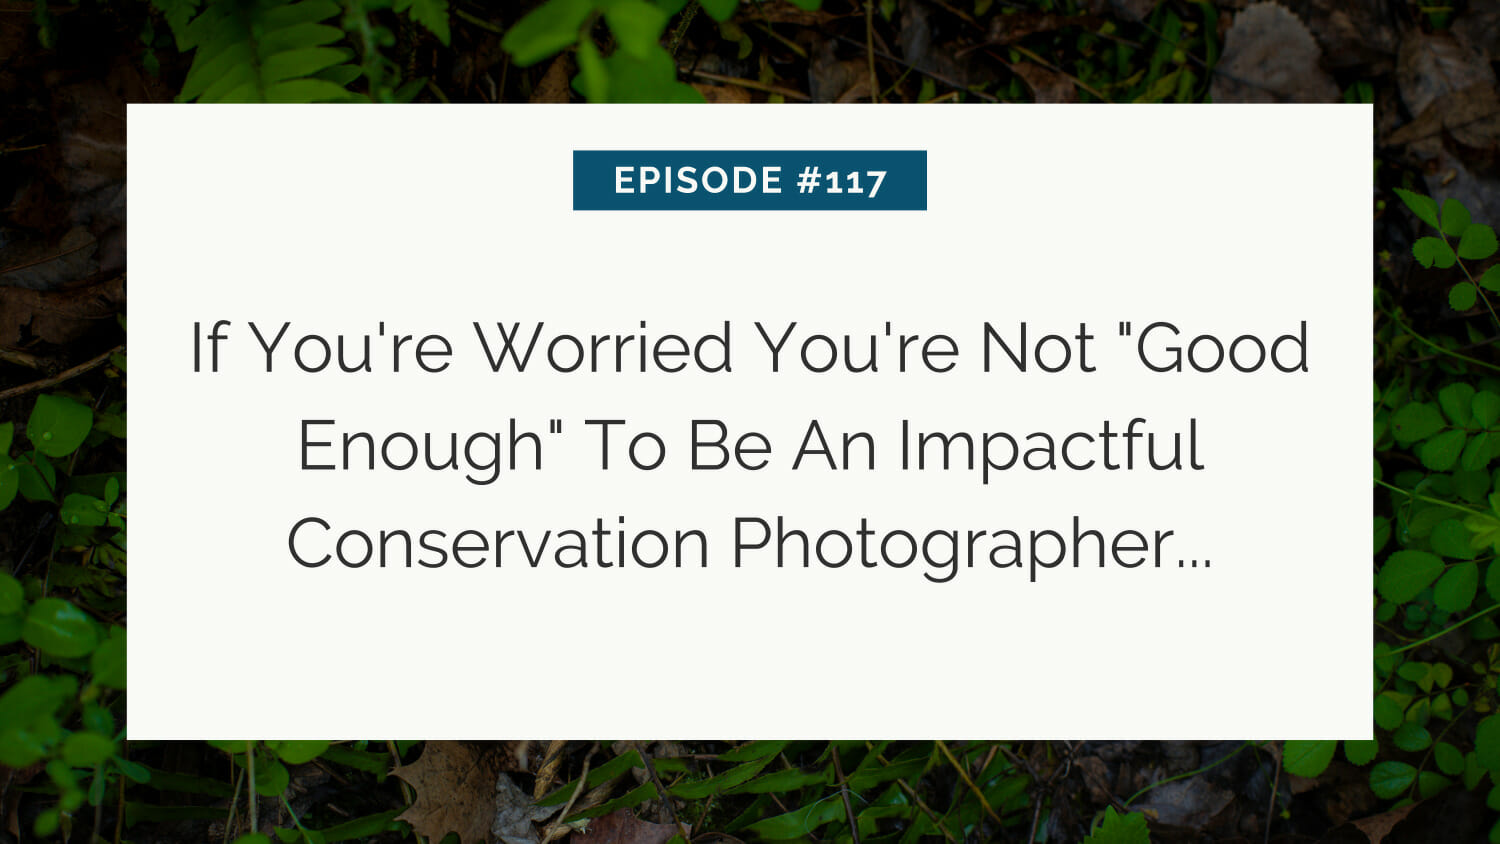 Inspirational quote for aspiring conservation photographers from episode #117.